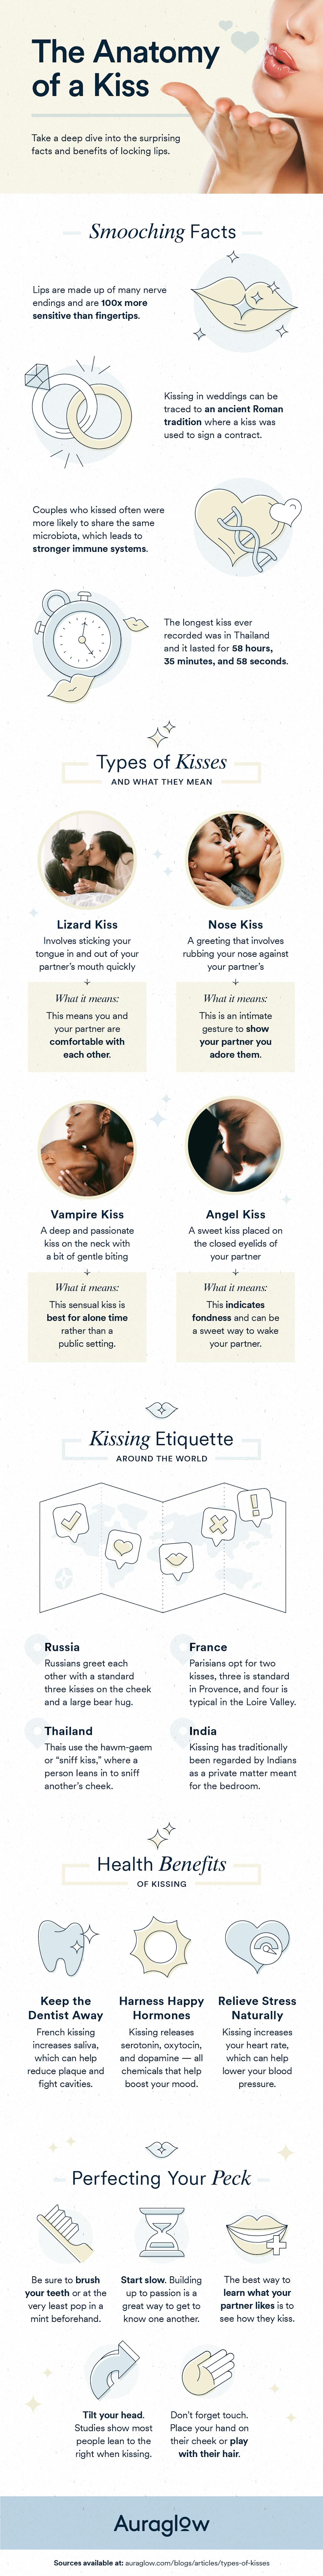 29 types of kisses infographic